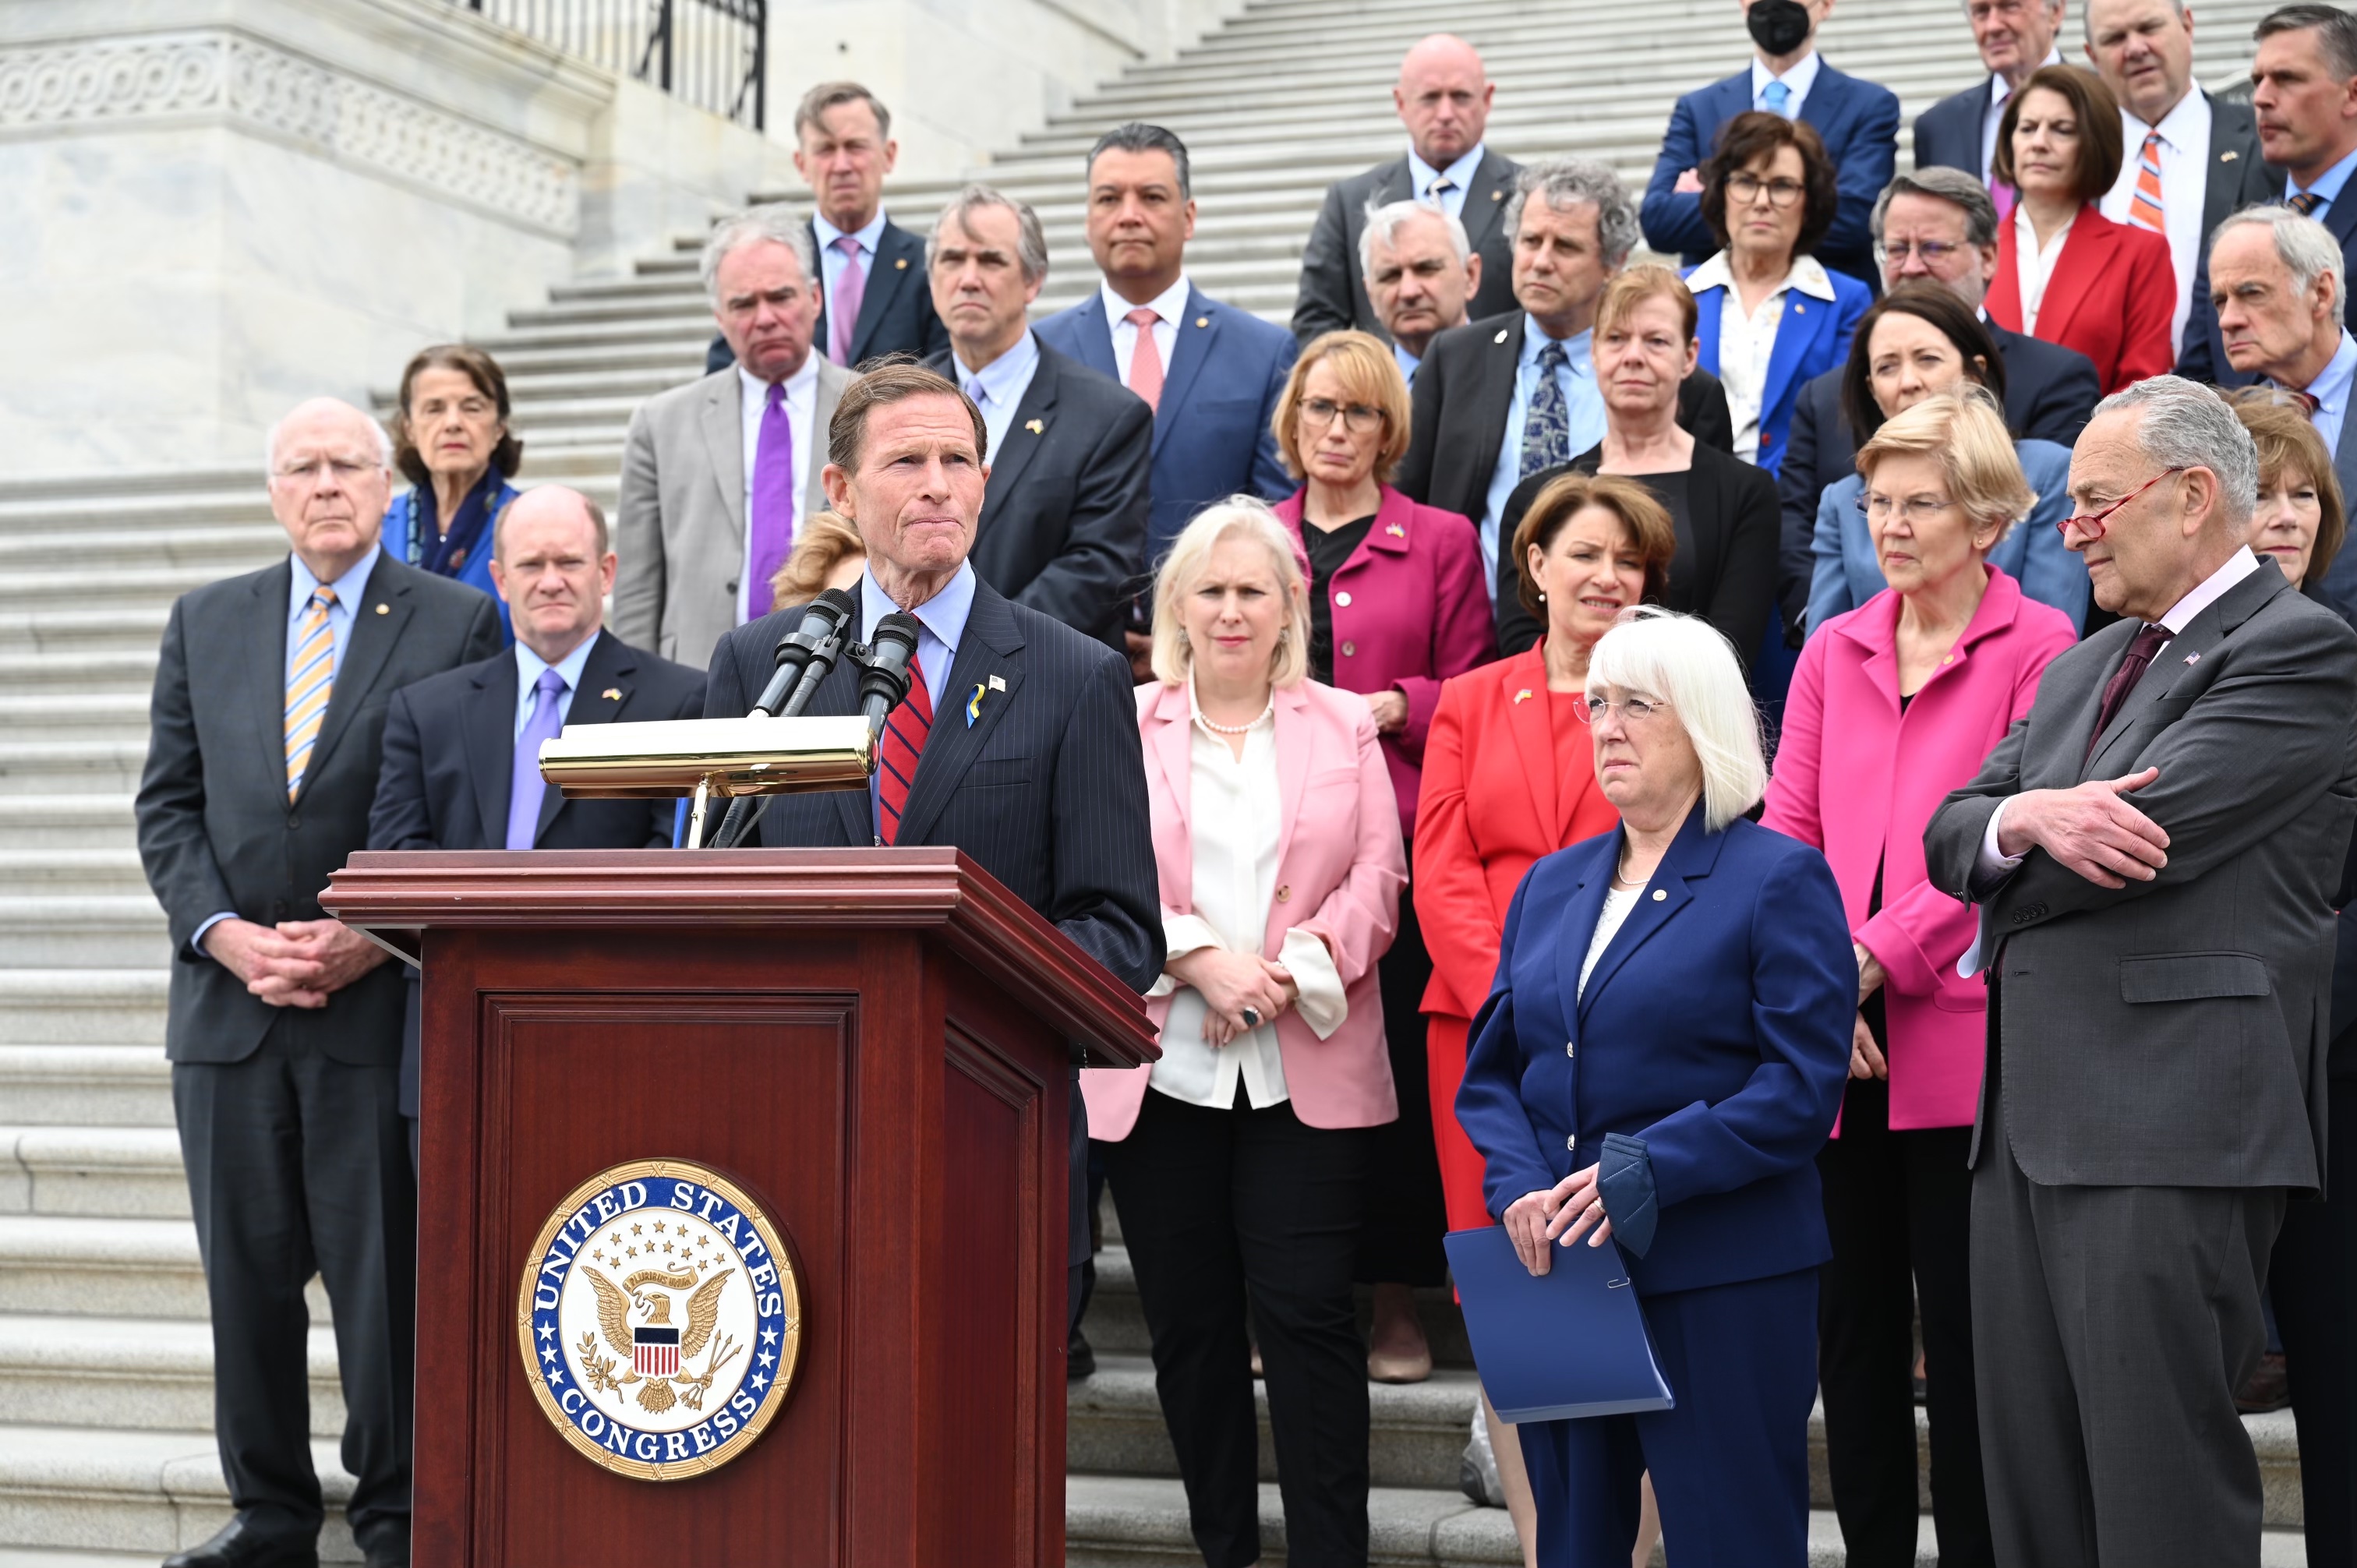 U.S. Senator Richard Blumenthal (D-CT), author and lead Senate sponsor of the Women’s Health Protection Act (WHPA), joined Senate Democrats in demanding action to protect reproductive rights in response to a draft majority opinion by the Supreme Court striking down Roe v. Wade. 